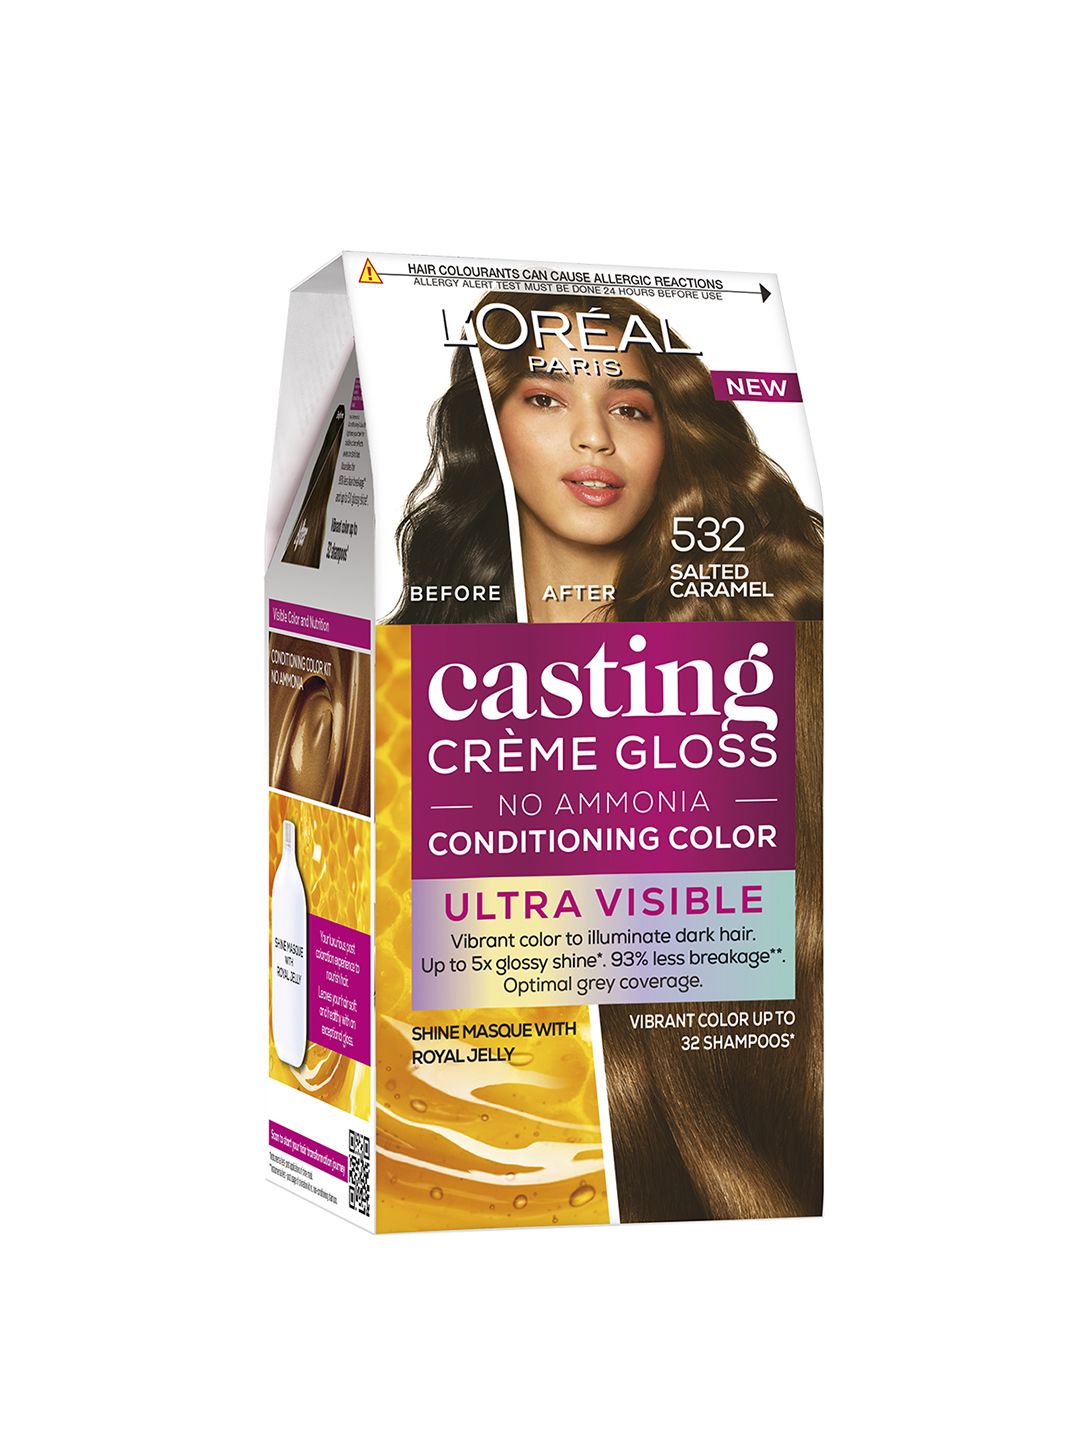 LOreal Paris Casting Creme Gloss Ultra Visible Hair Color - Salted Caramel 532 Price in India